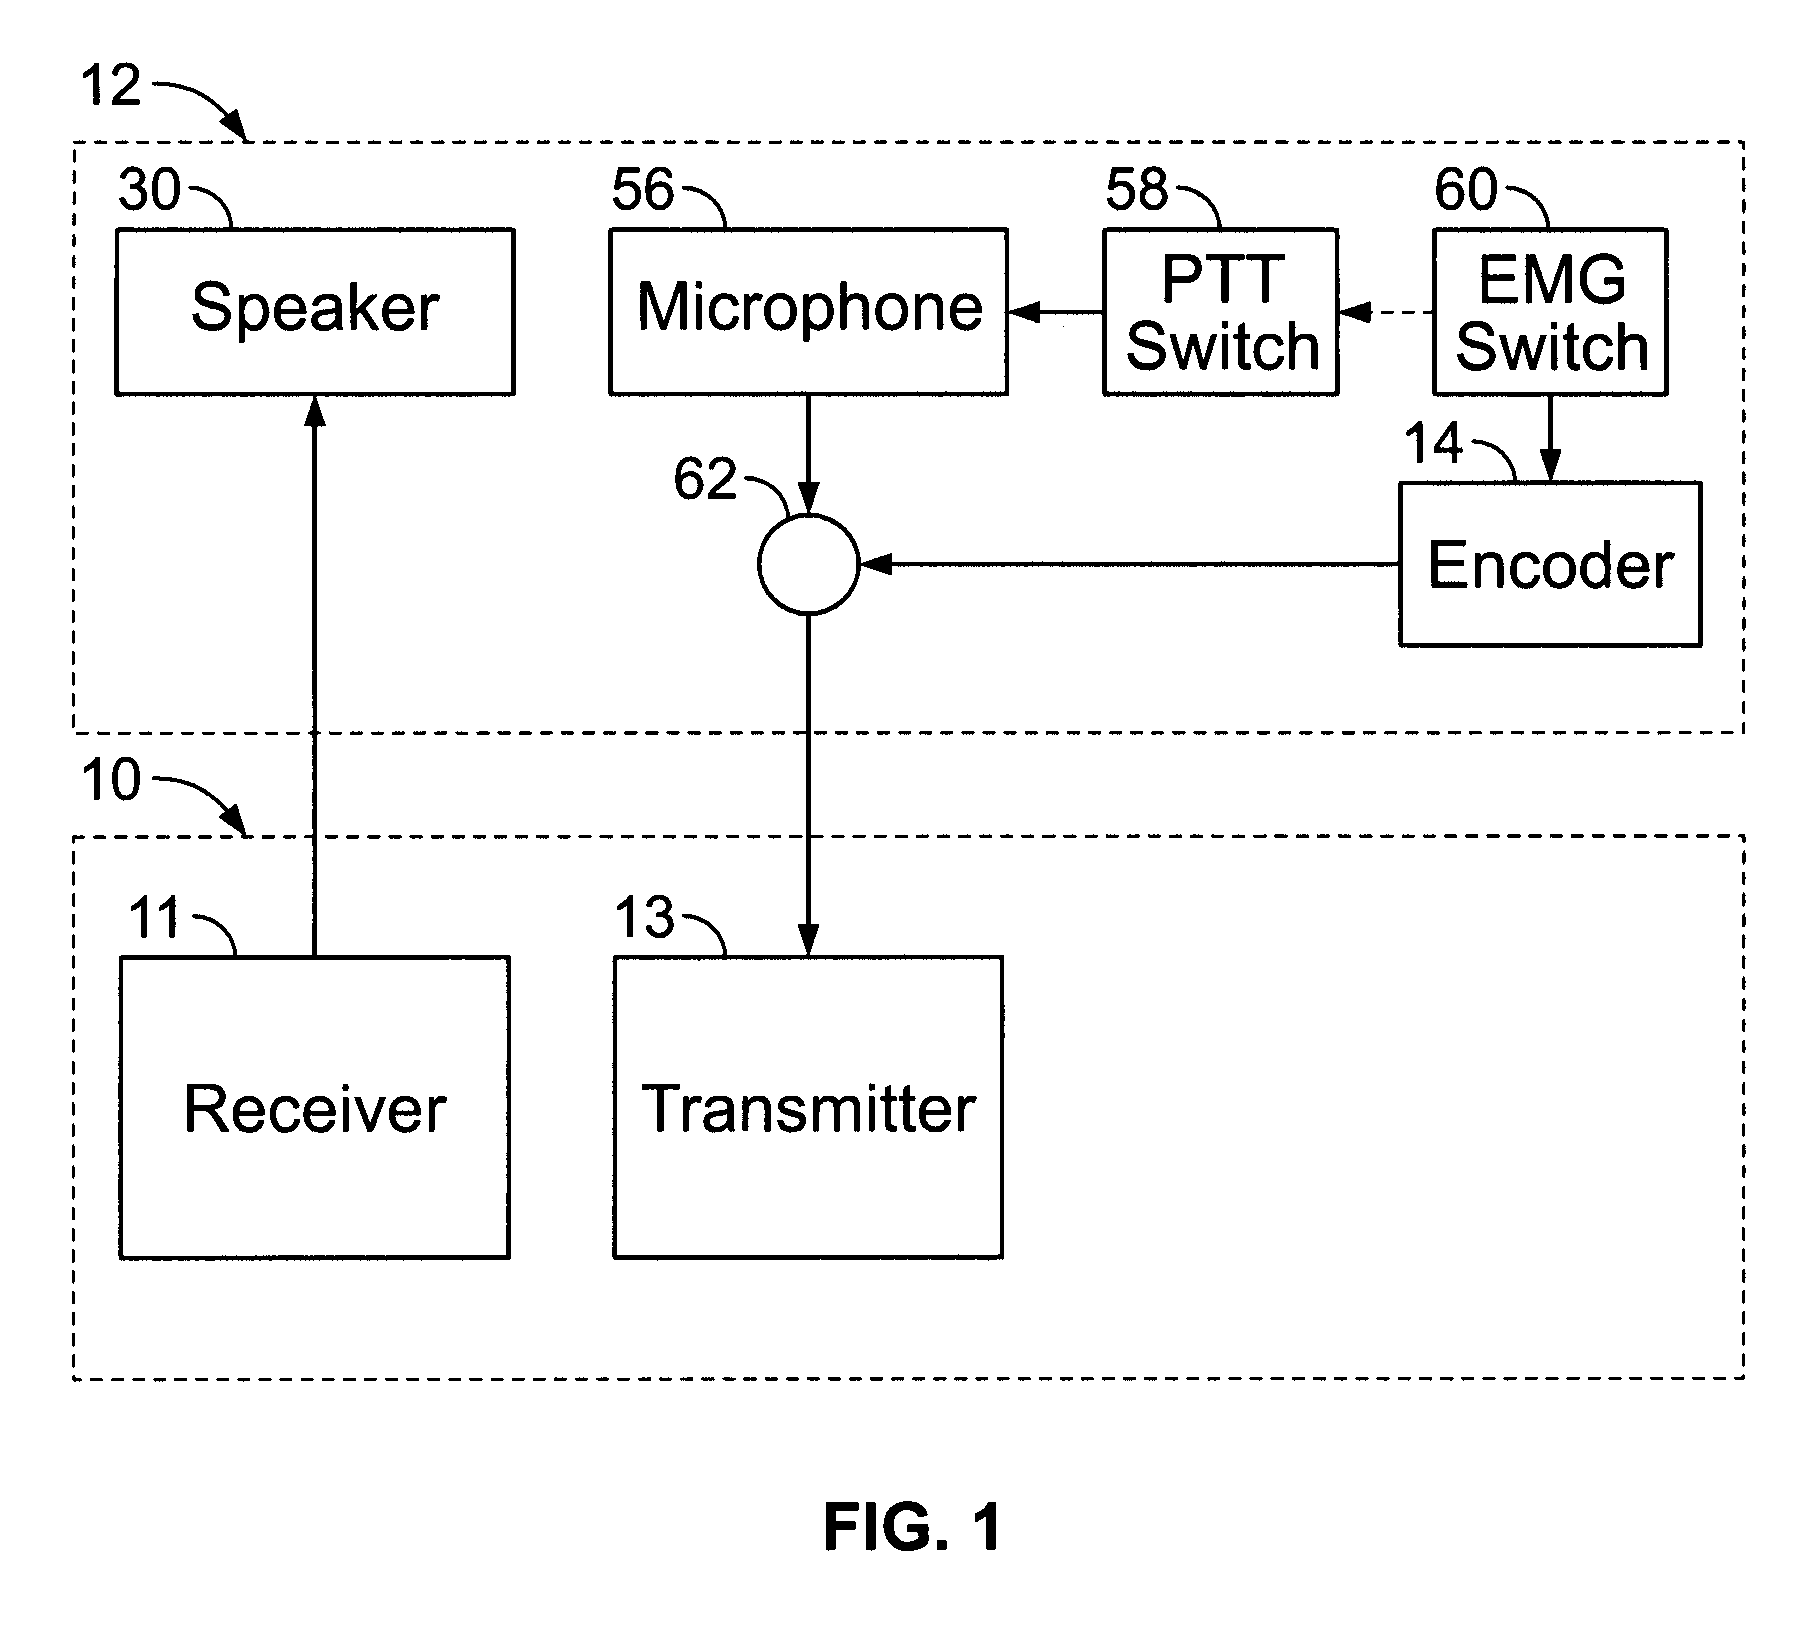 Method and apparatus to provide digital signaling without internal modification of analog FM transceiver